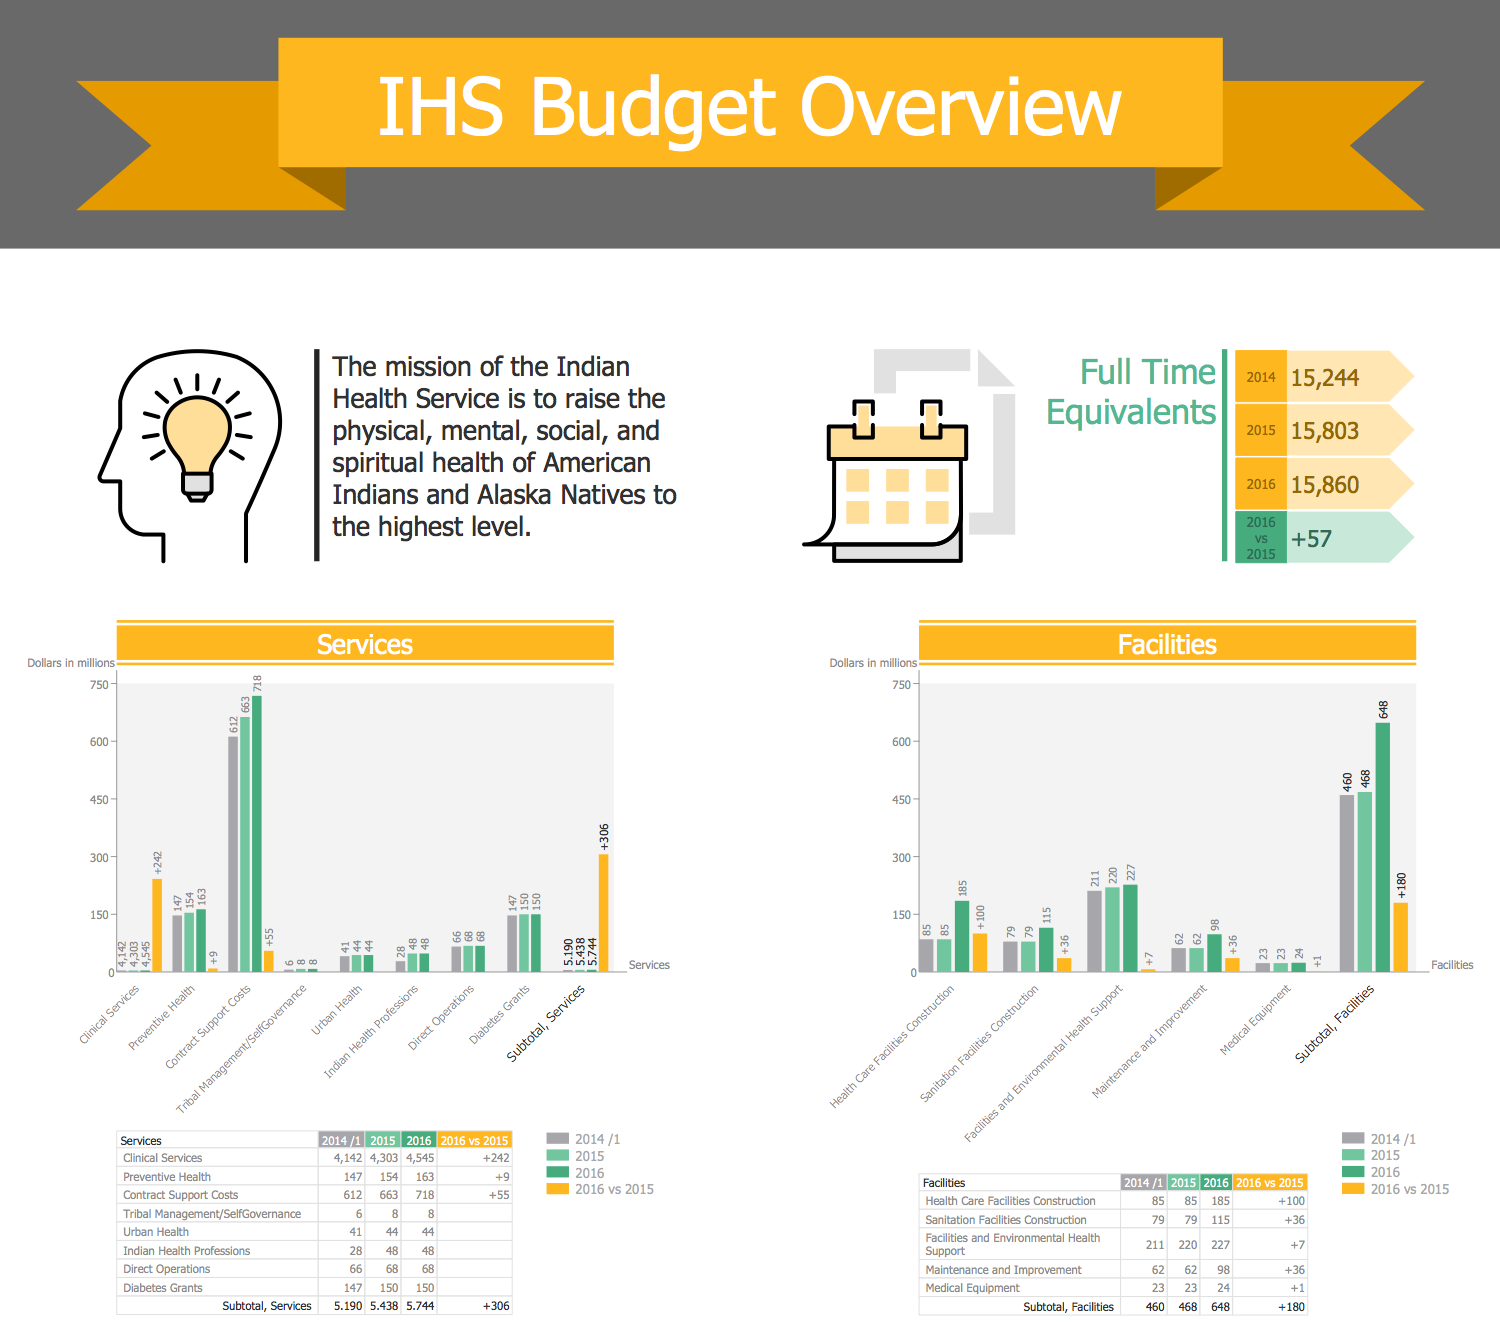 IHS Budget Overview